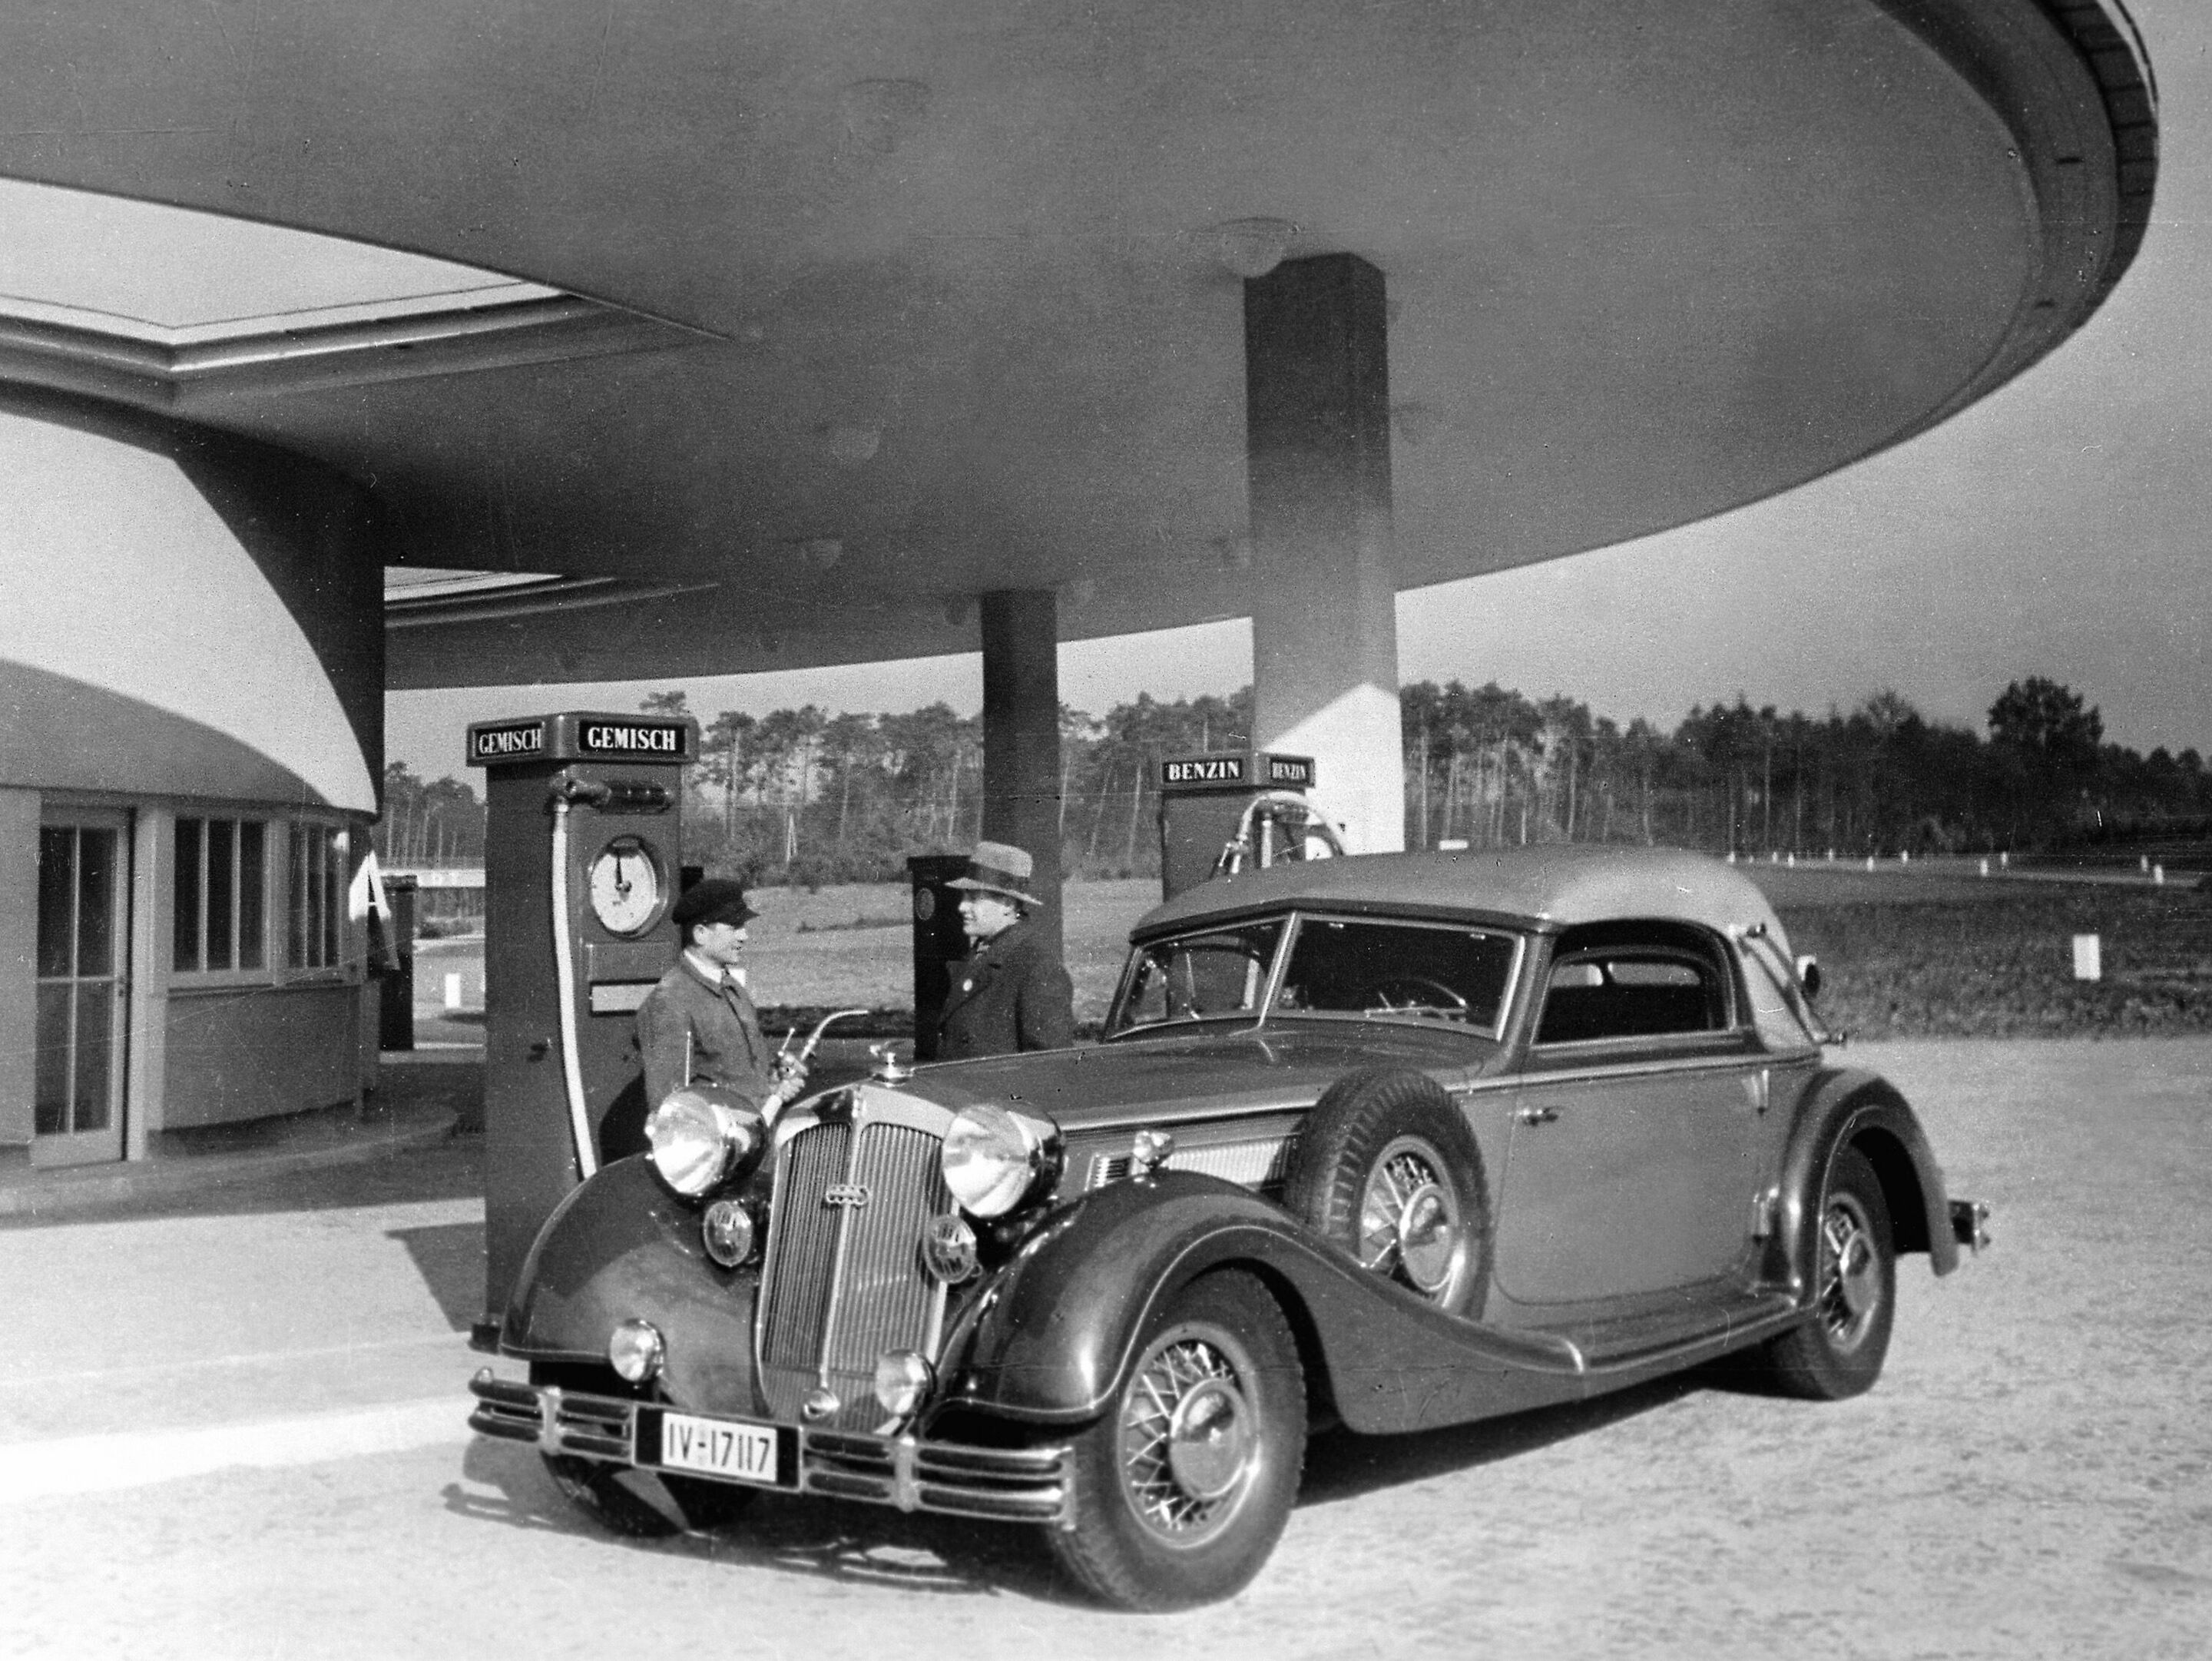 A filling station on the German "autobahn" at the end of the Thirties: A Horch 853 Sport-Cabriolet (1935 - 1940) is having its tank filled with the petrol (gasoline) and benzene mixture that was in use at that time.